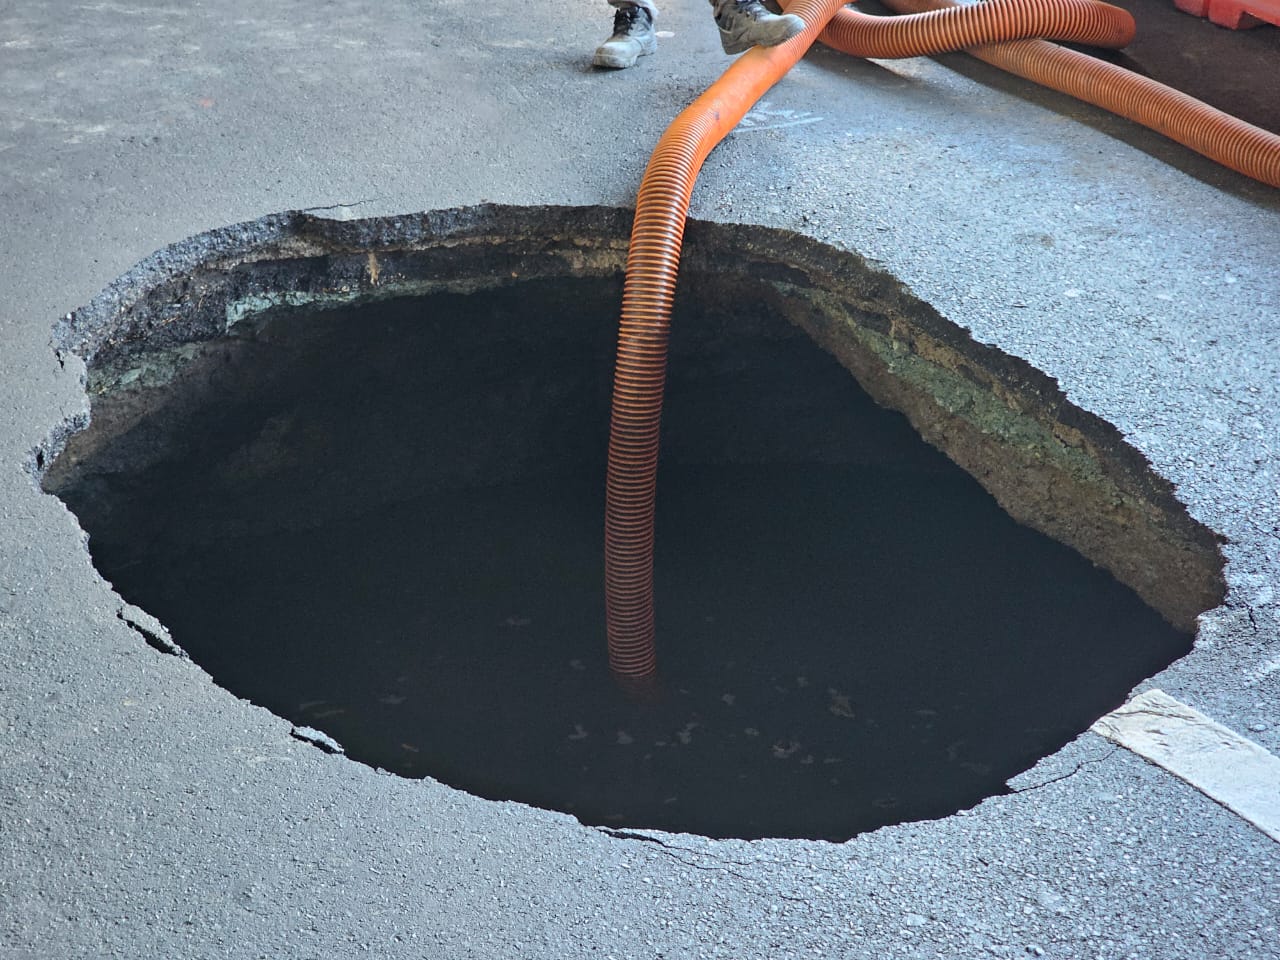 Sinkhole spotted along Sales Road near the Villamor Air Base in Pasay City on Sunday afternoon, April 14, 2024. (INQUIRER.net/ Ram Nabong)